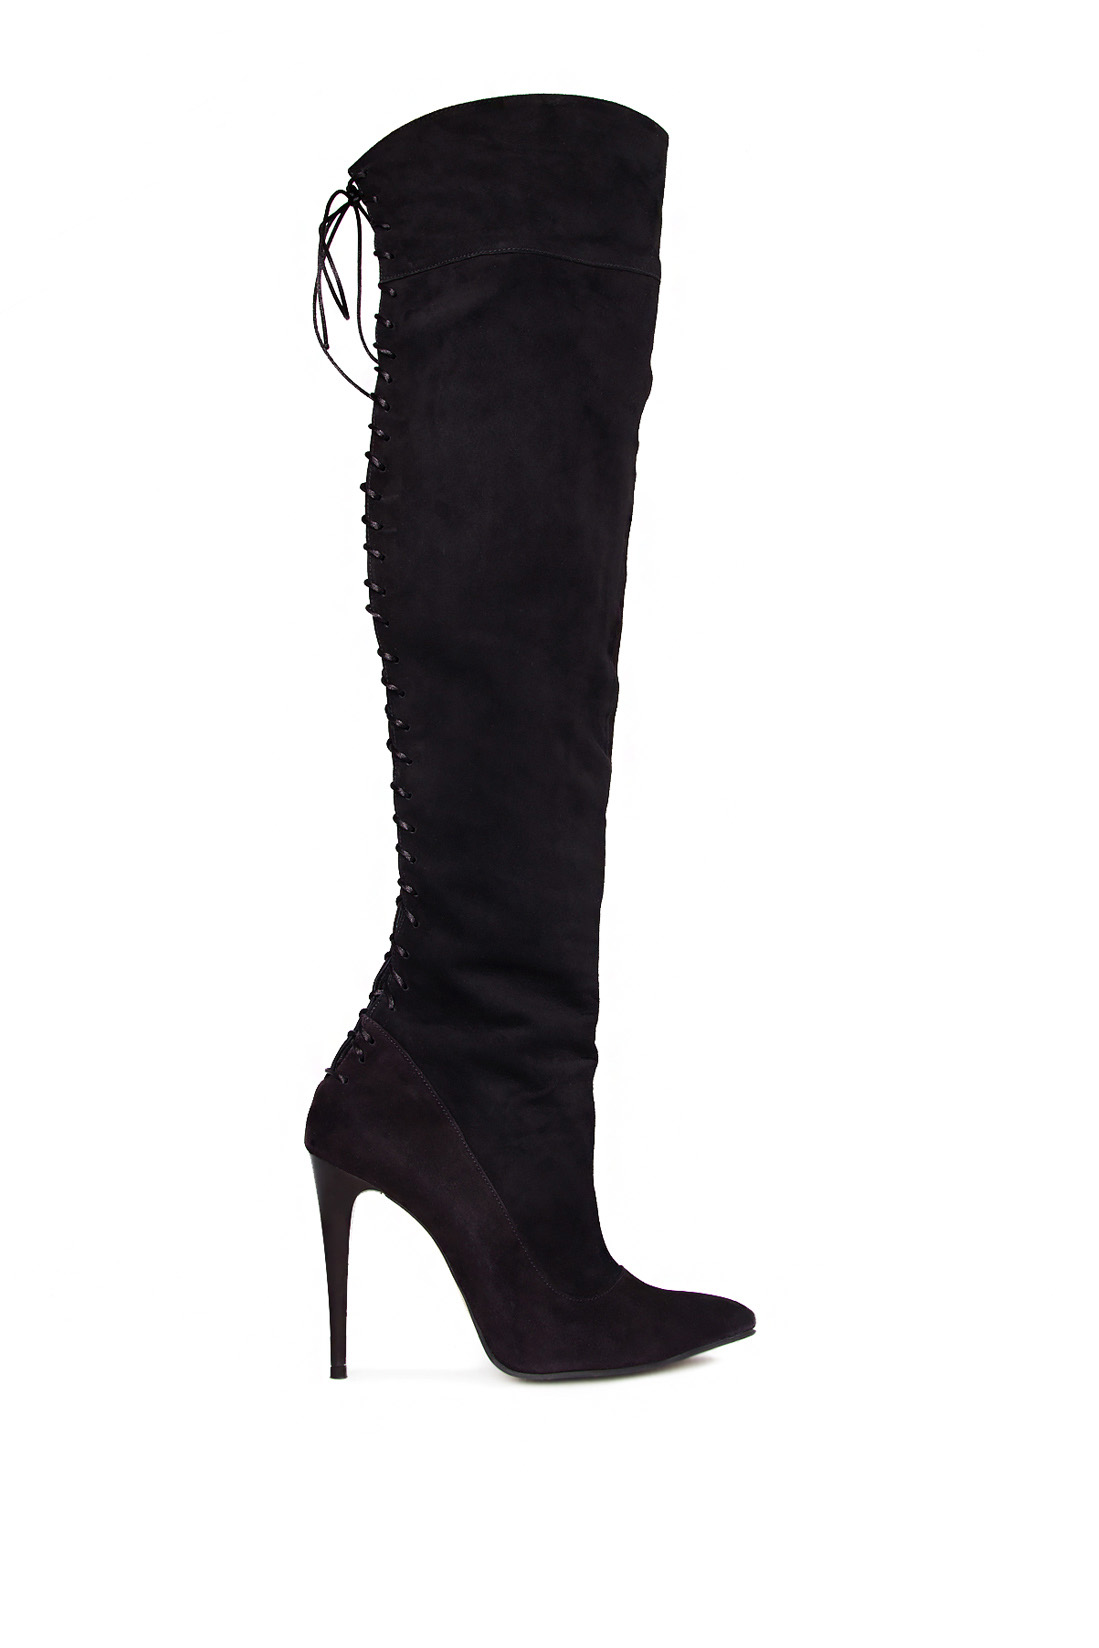 Lace-up suede over-the-knee boots Ana Kaloni image 0